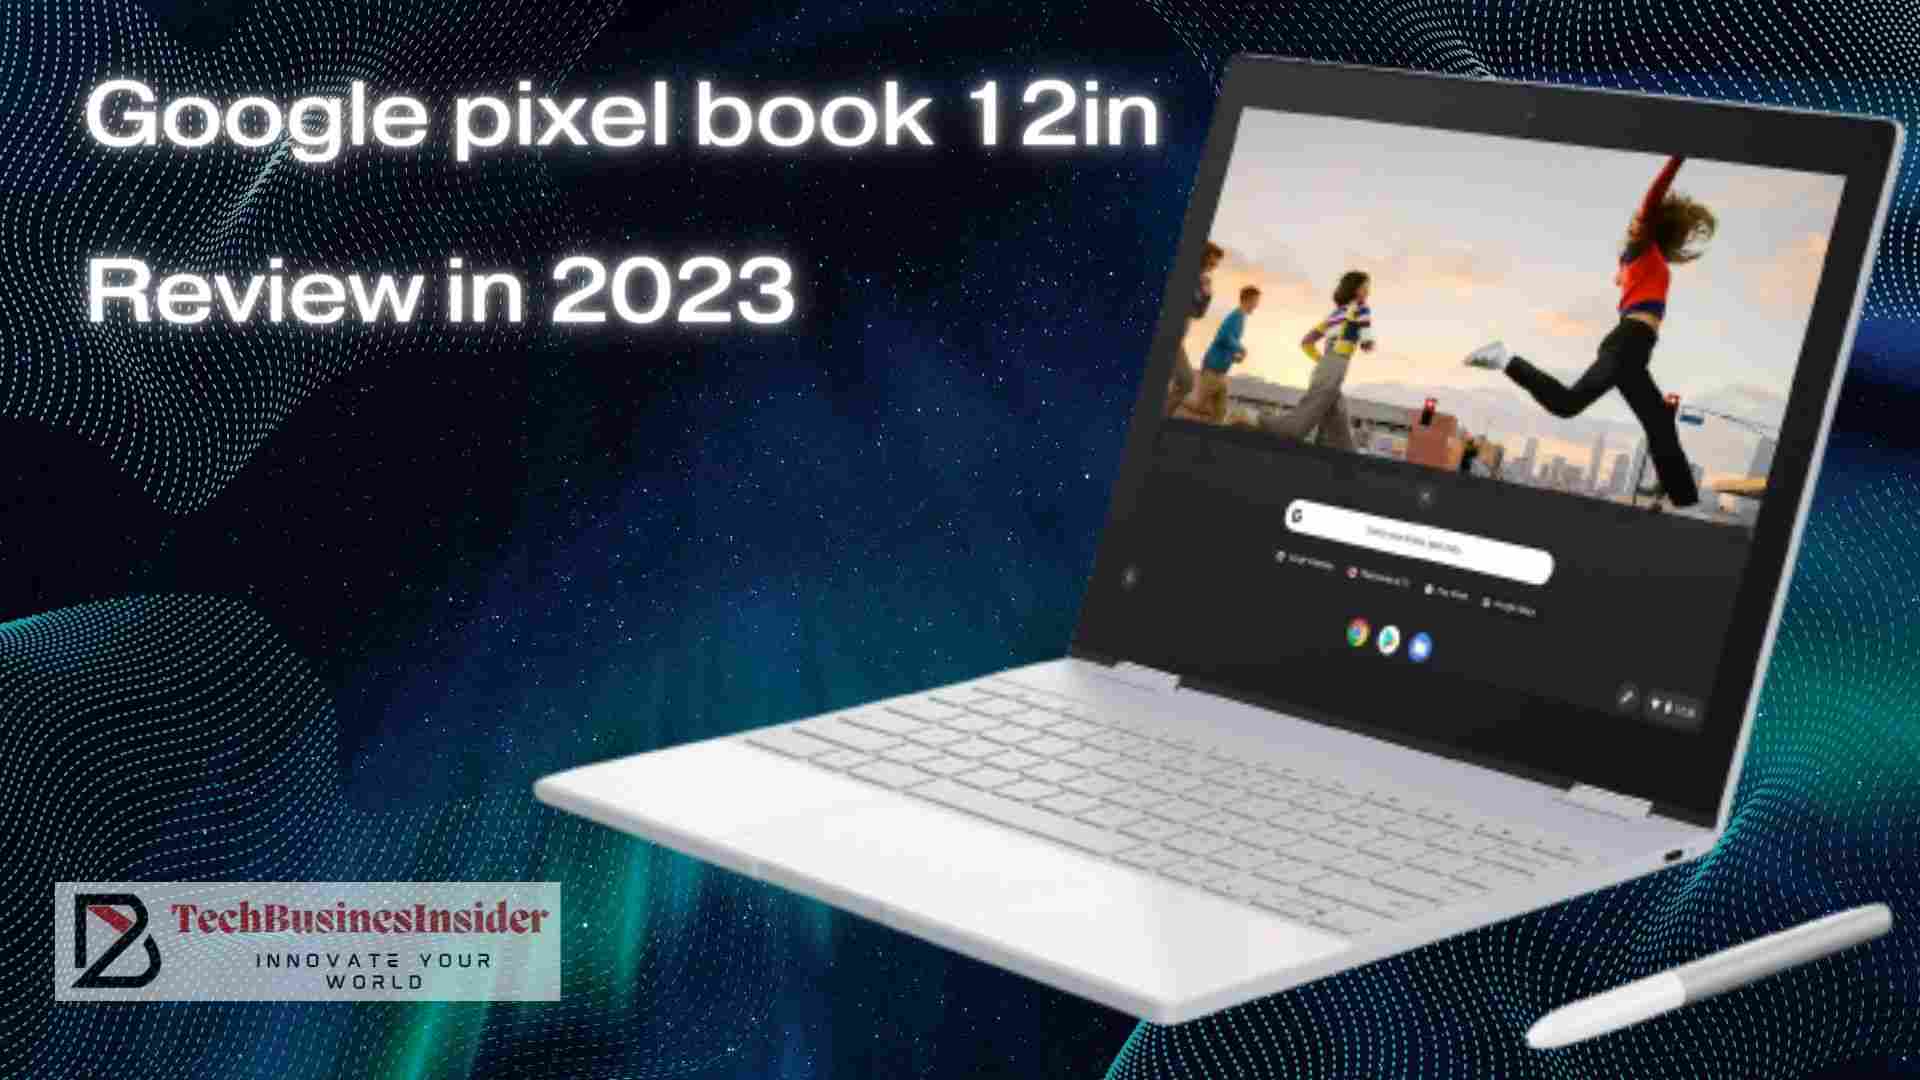 Google pixel book 12in: Review of Amazing device, Security & Software